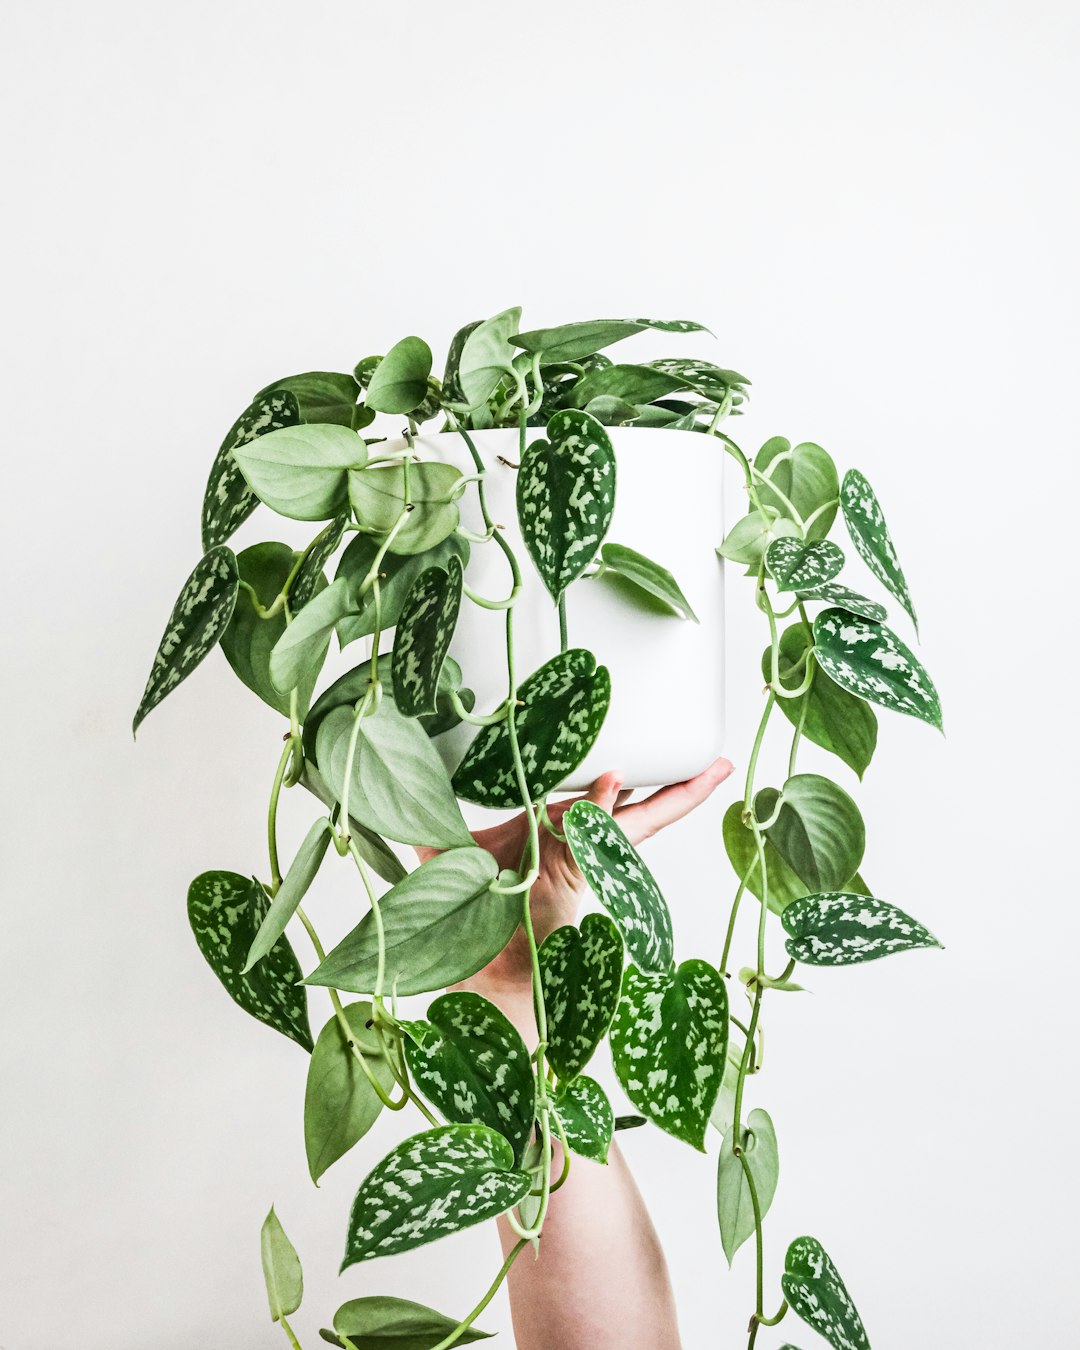 Optimizing Humidity and Temperature for Healthier Houseplants